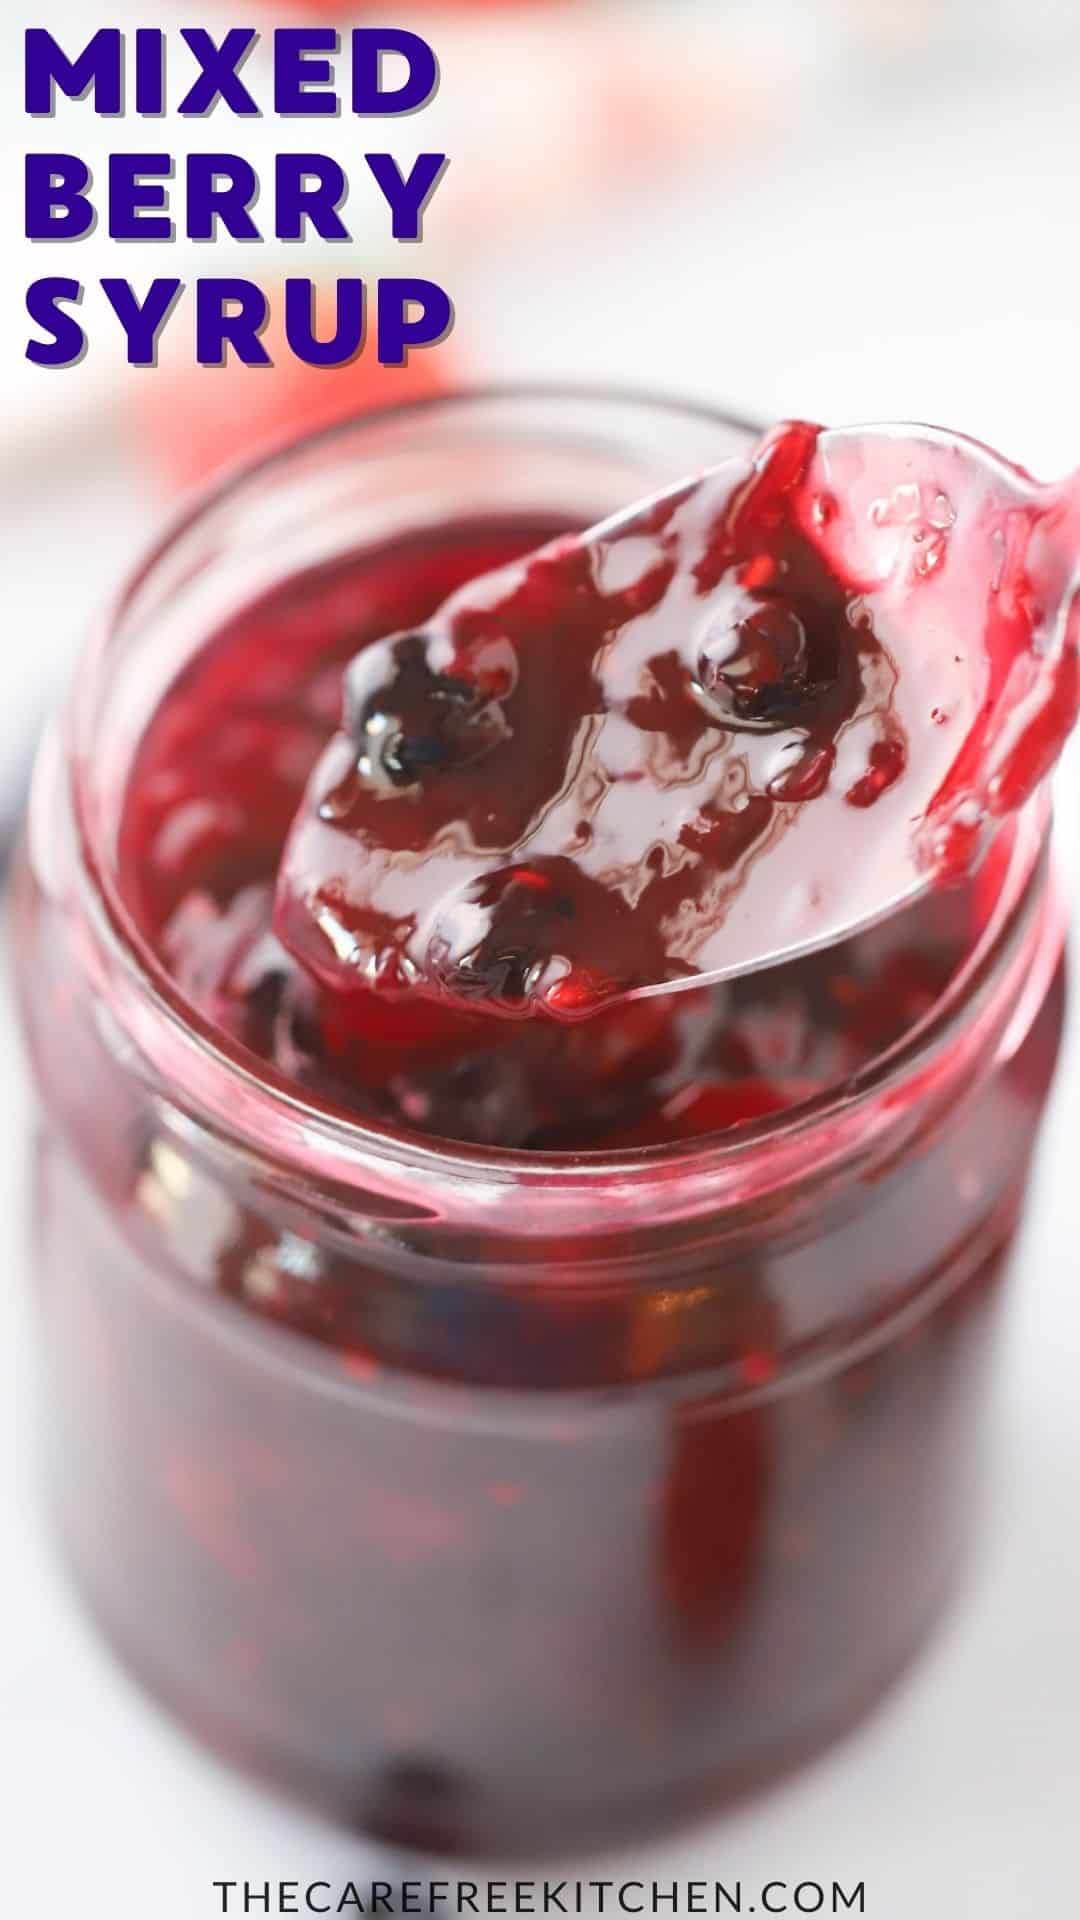 Mixed Berry Syrup Recipe - The Carefree Kitchen